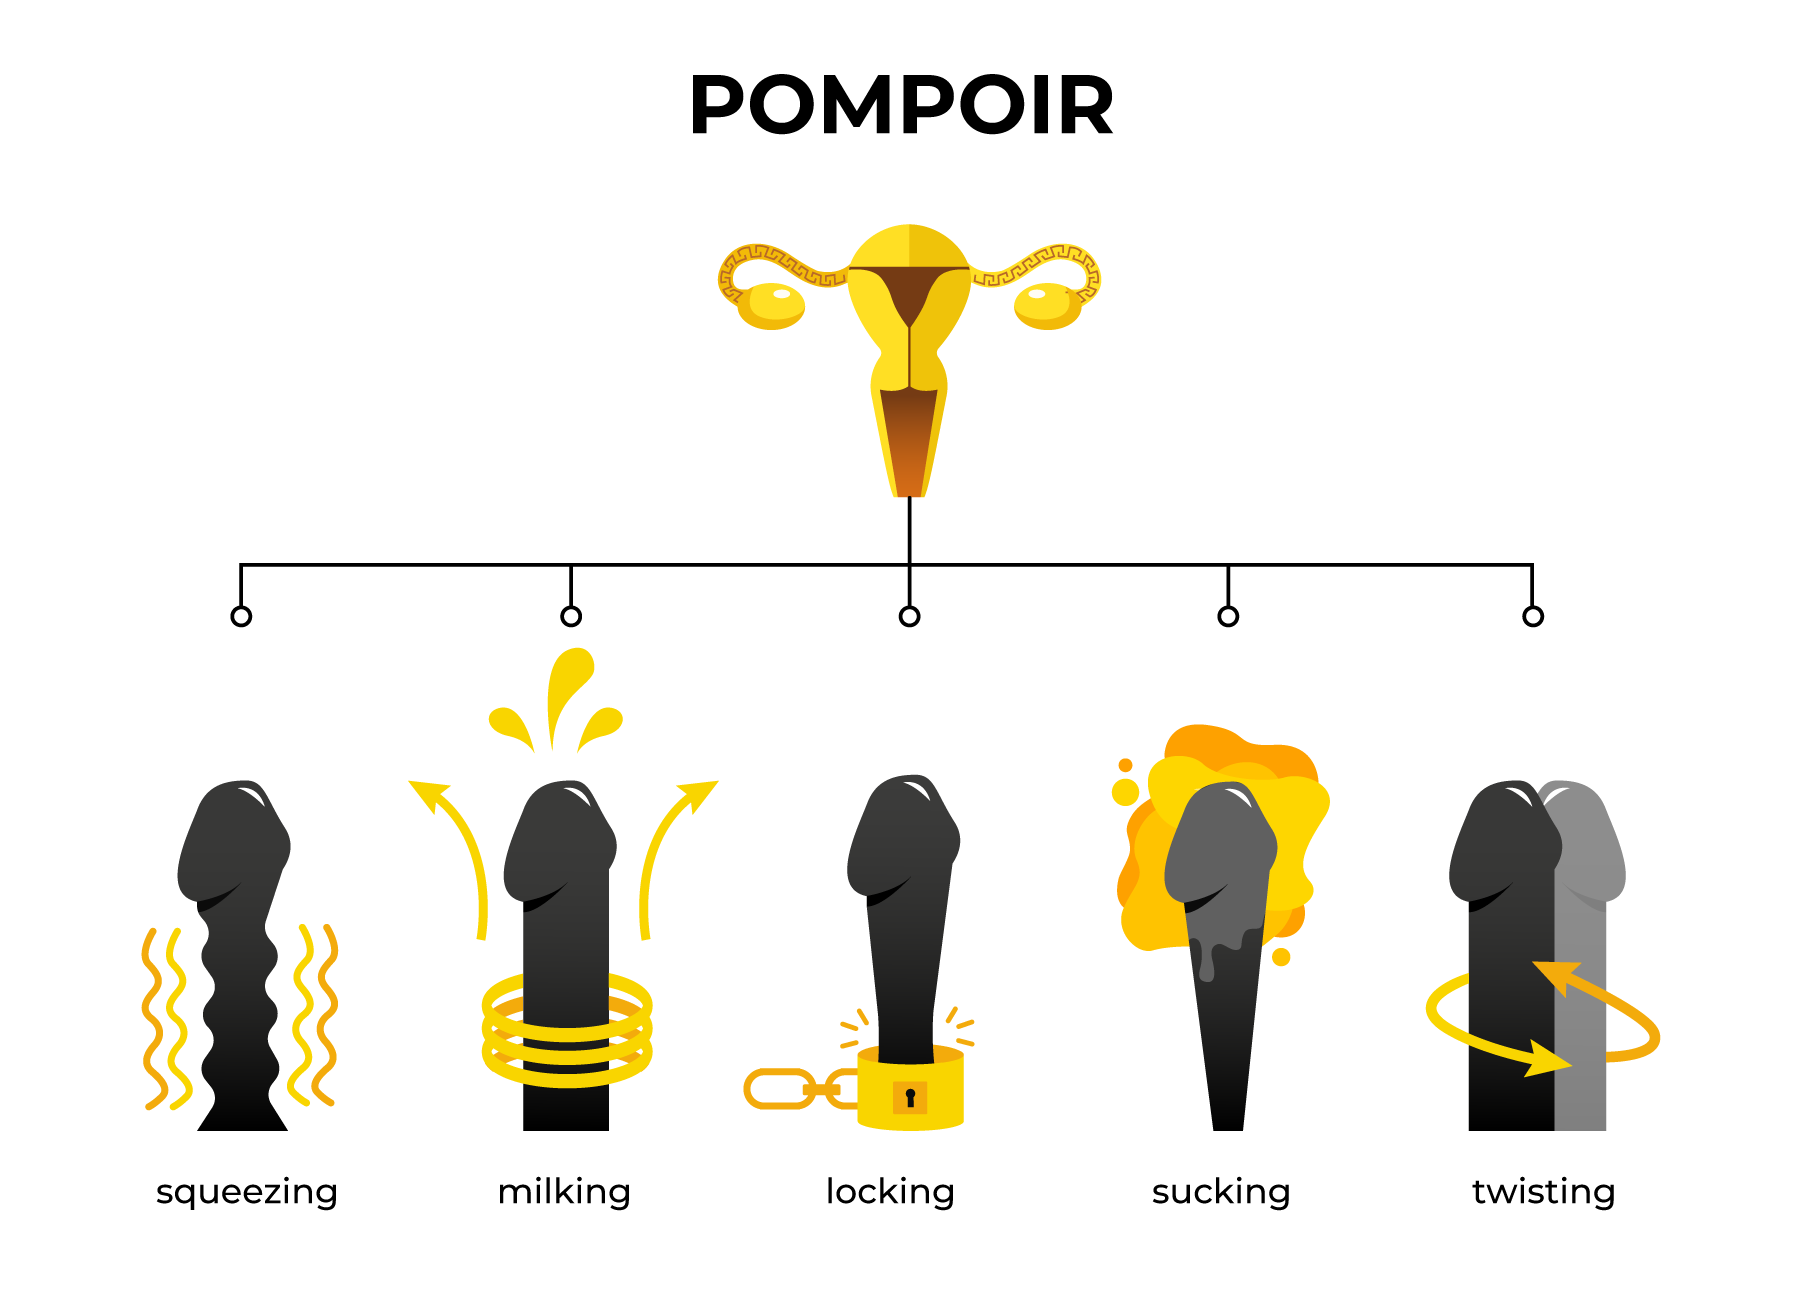 Pompoir The Practice That Makes Her Cum Harder Than Ever pic image